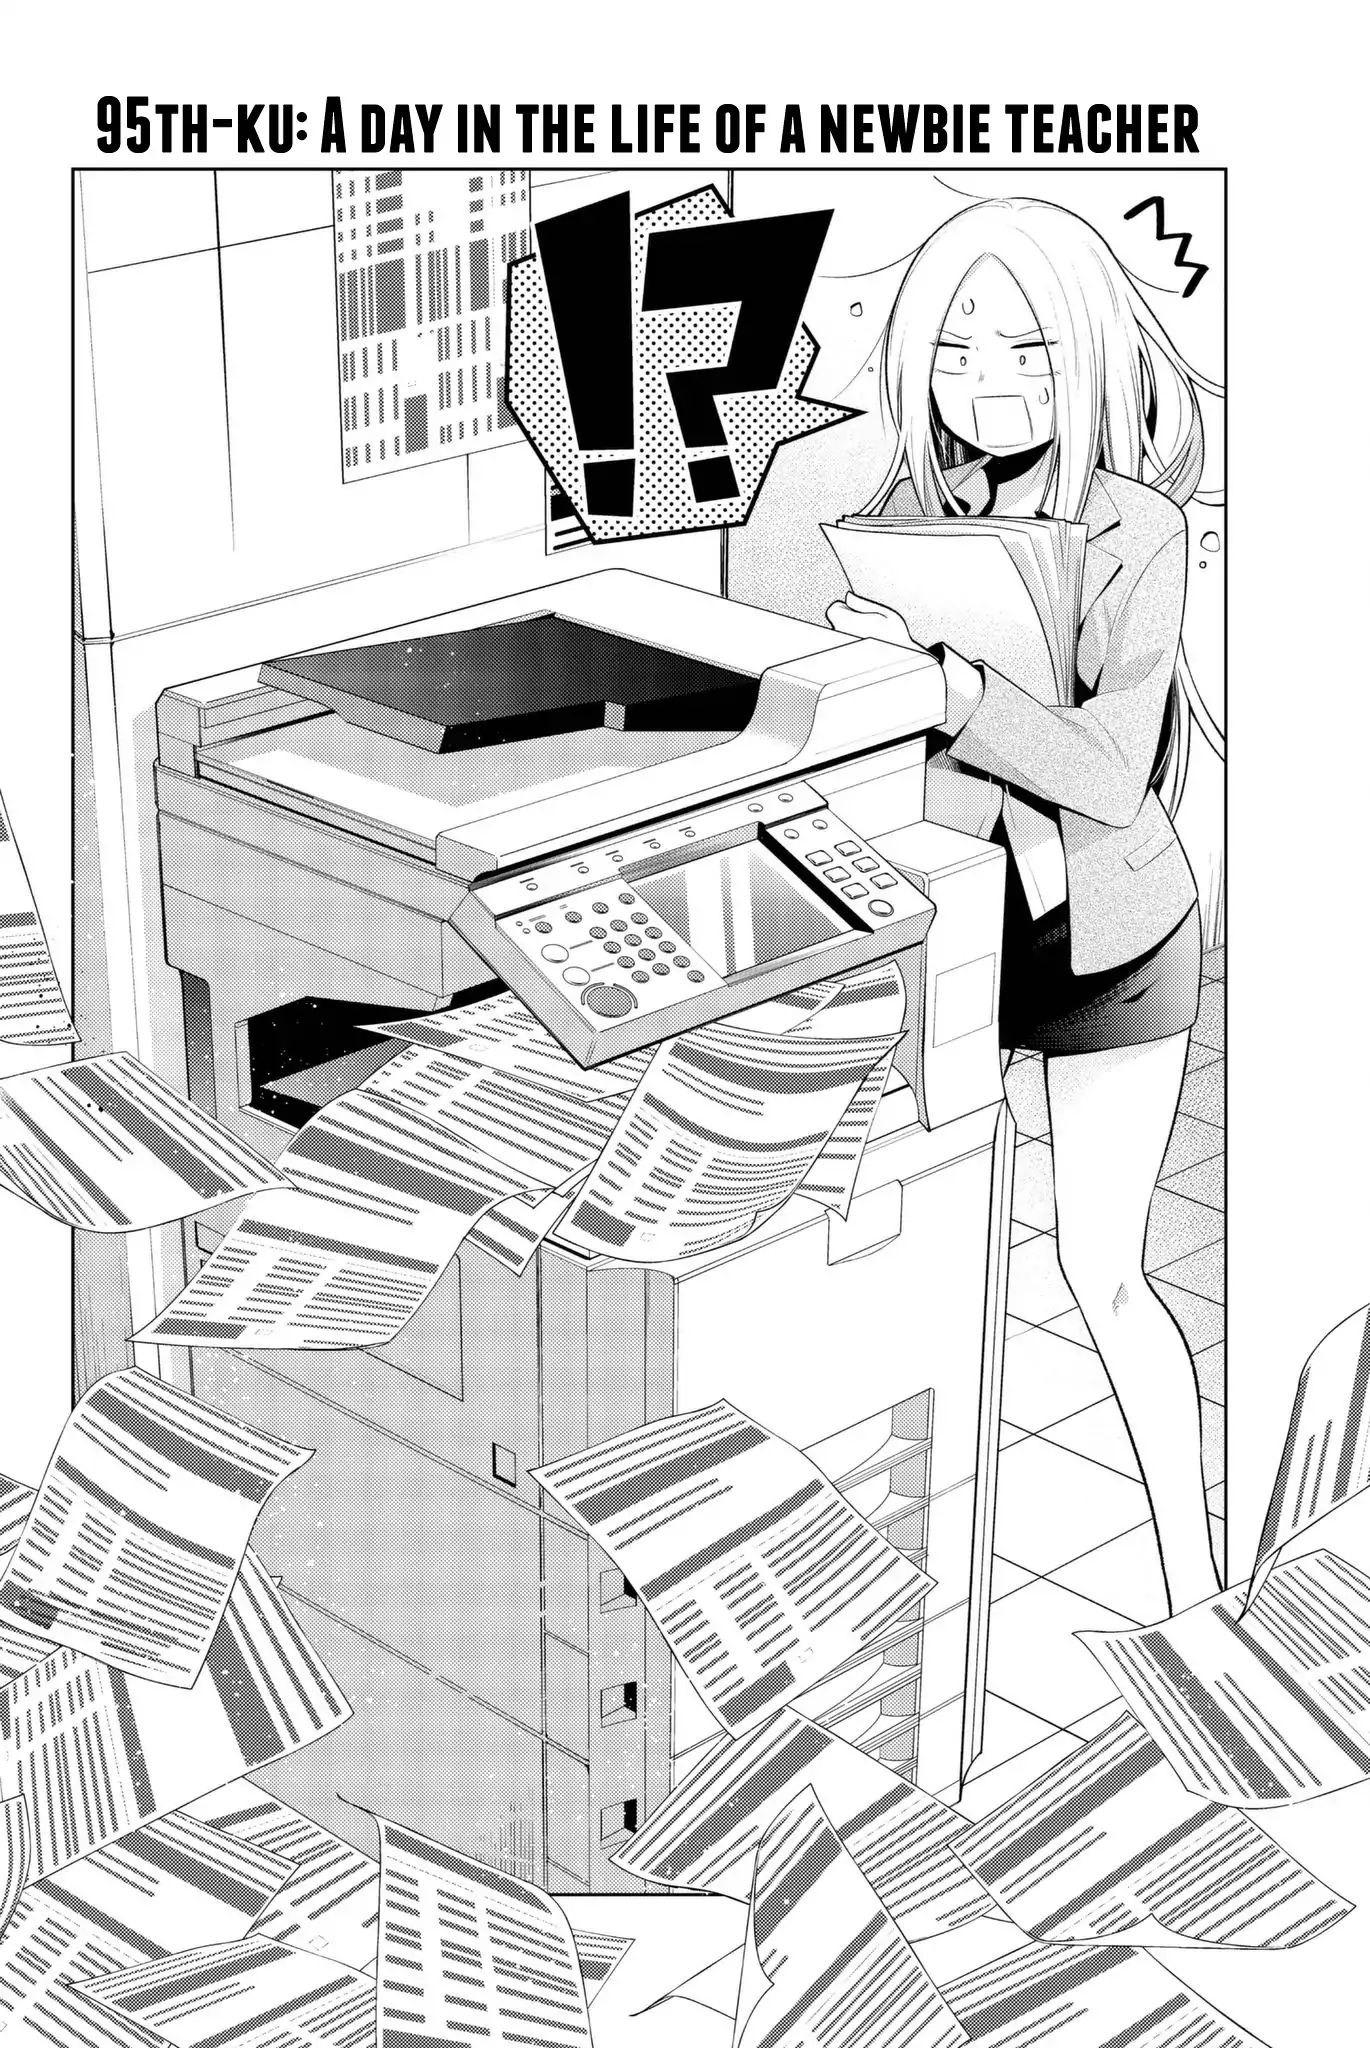 Senryuu Shoujo Vol.7 Chapter 95: A Day In The Life Of A Newbie Teacher - Picture 2